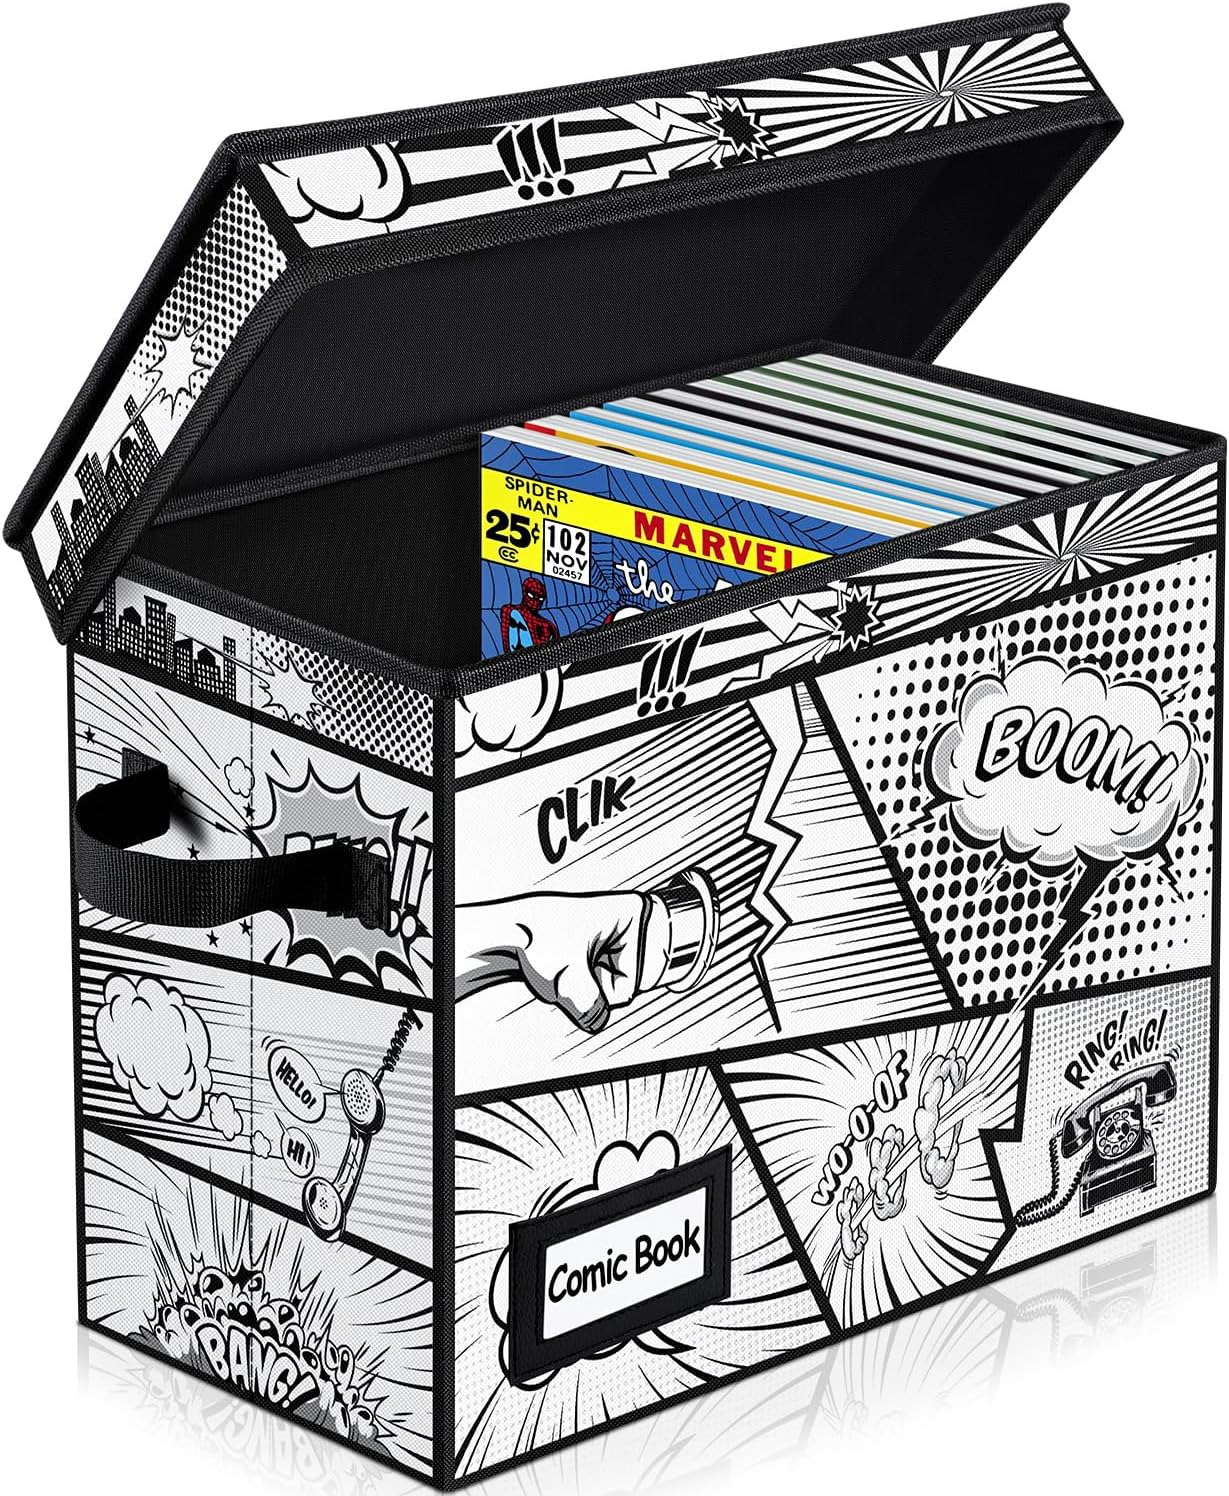 Comic Book Storage Box with Attached Lid, Collapsible Fabric Storage Bins with H